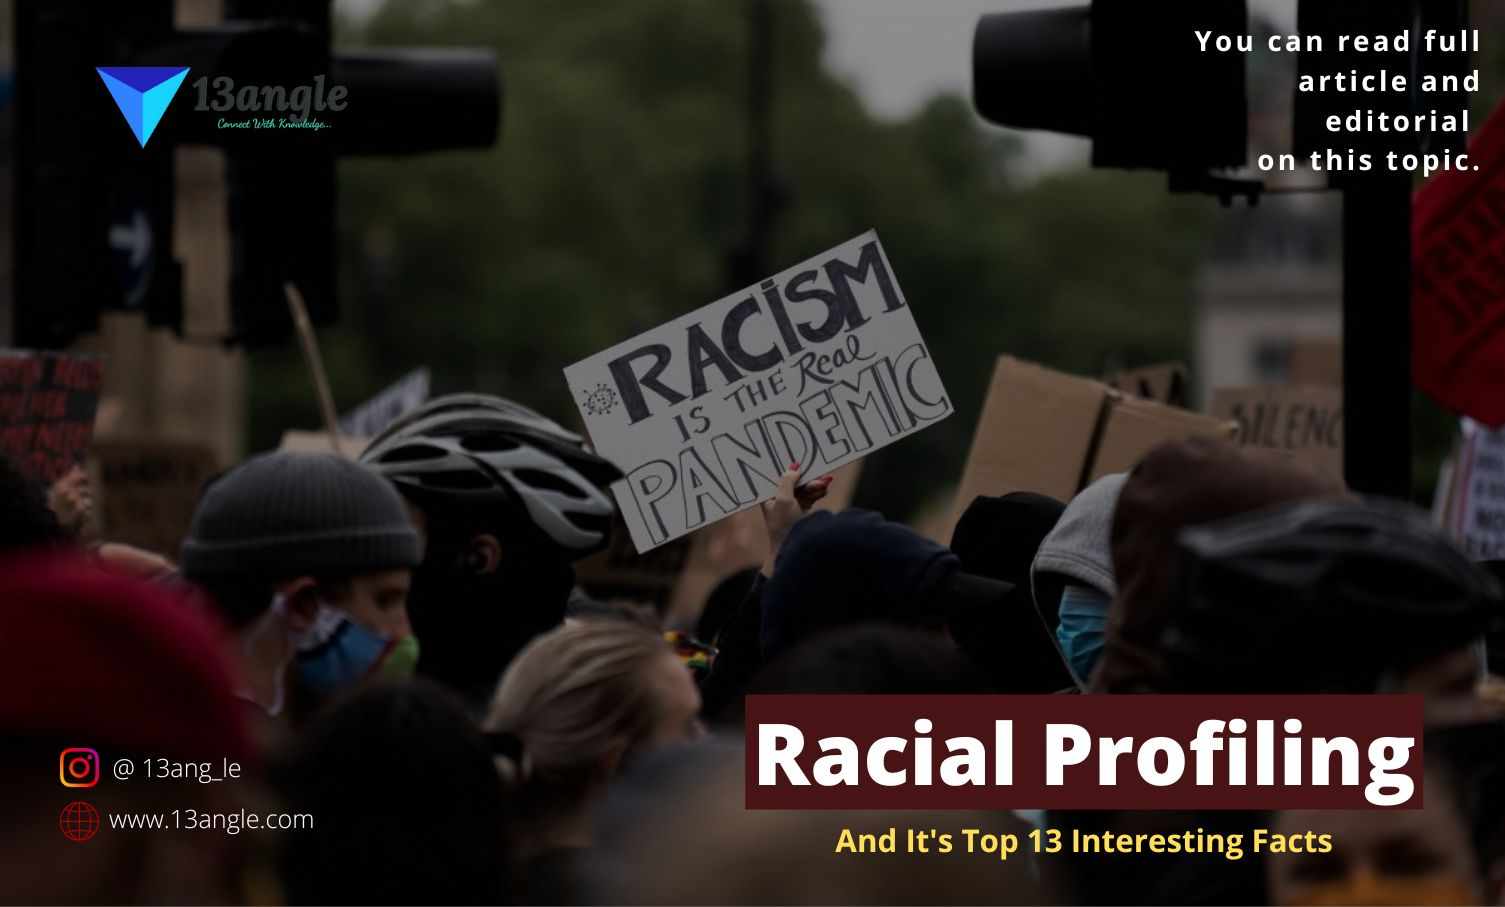 Racial Profiling And It's Top 13 Interesting Facts- 13angle.com